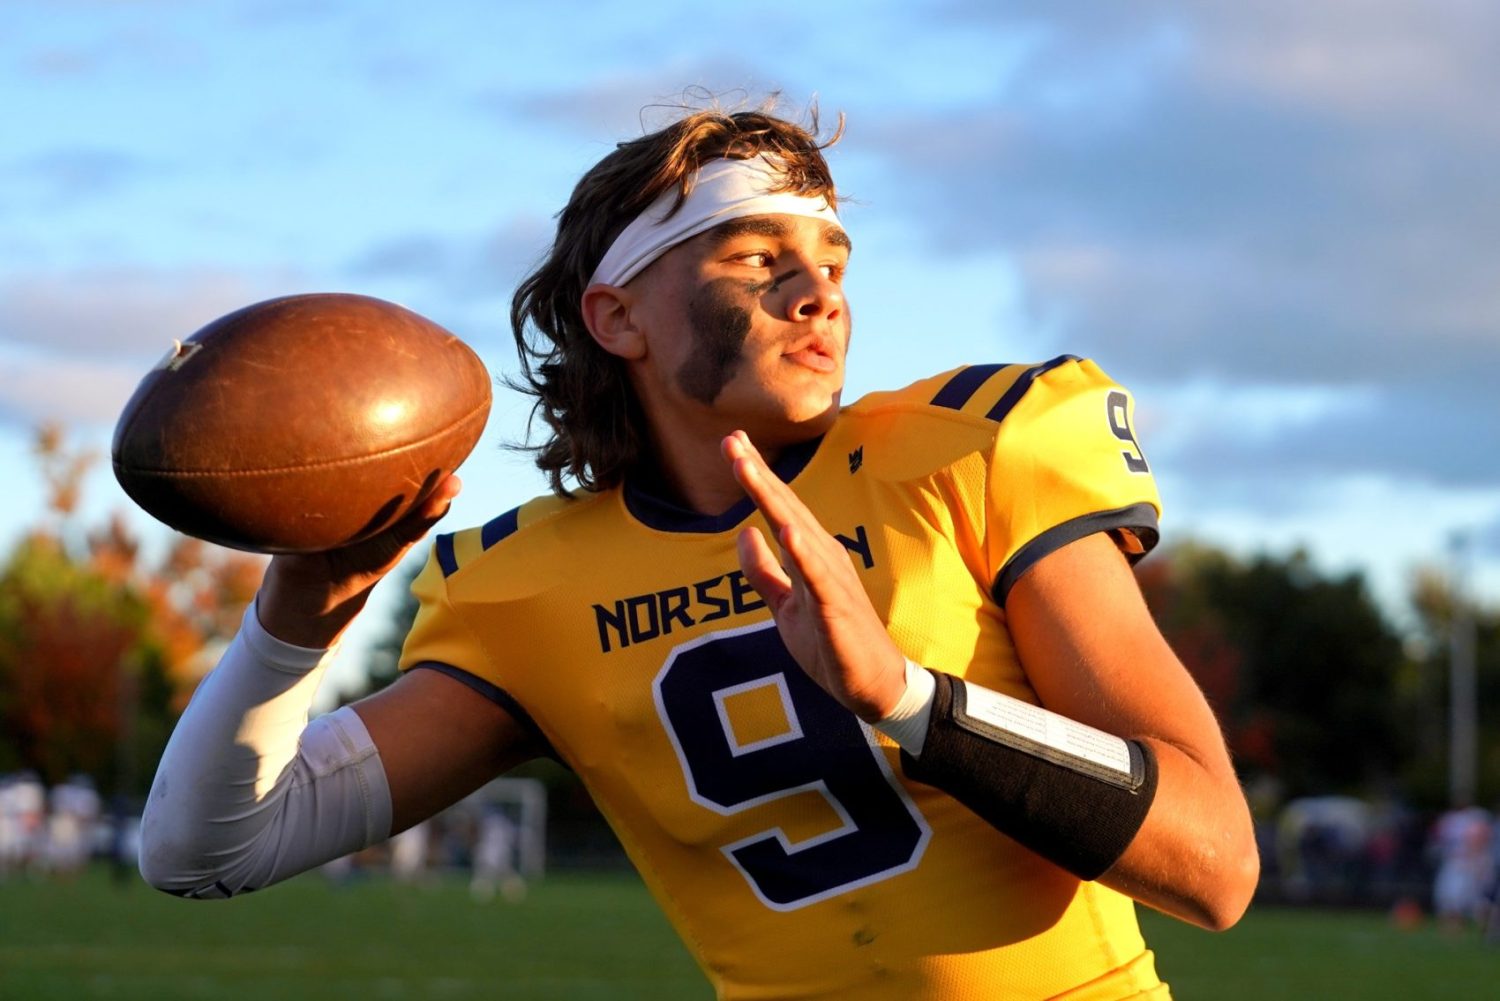 North Muskegon’s James Young named LSJ offensive player of the month